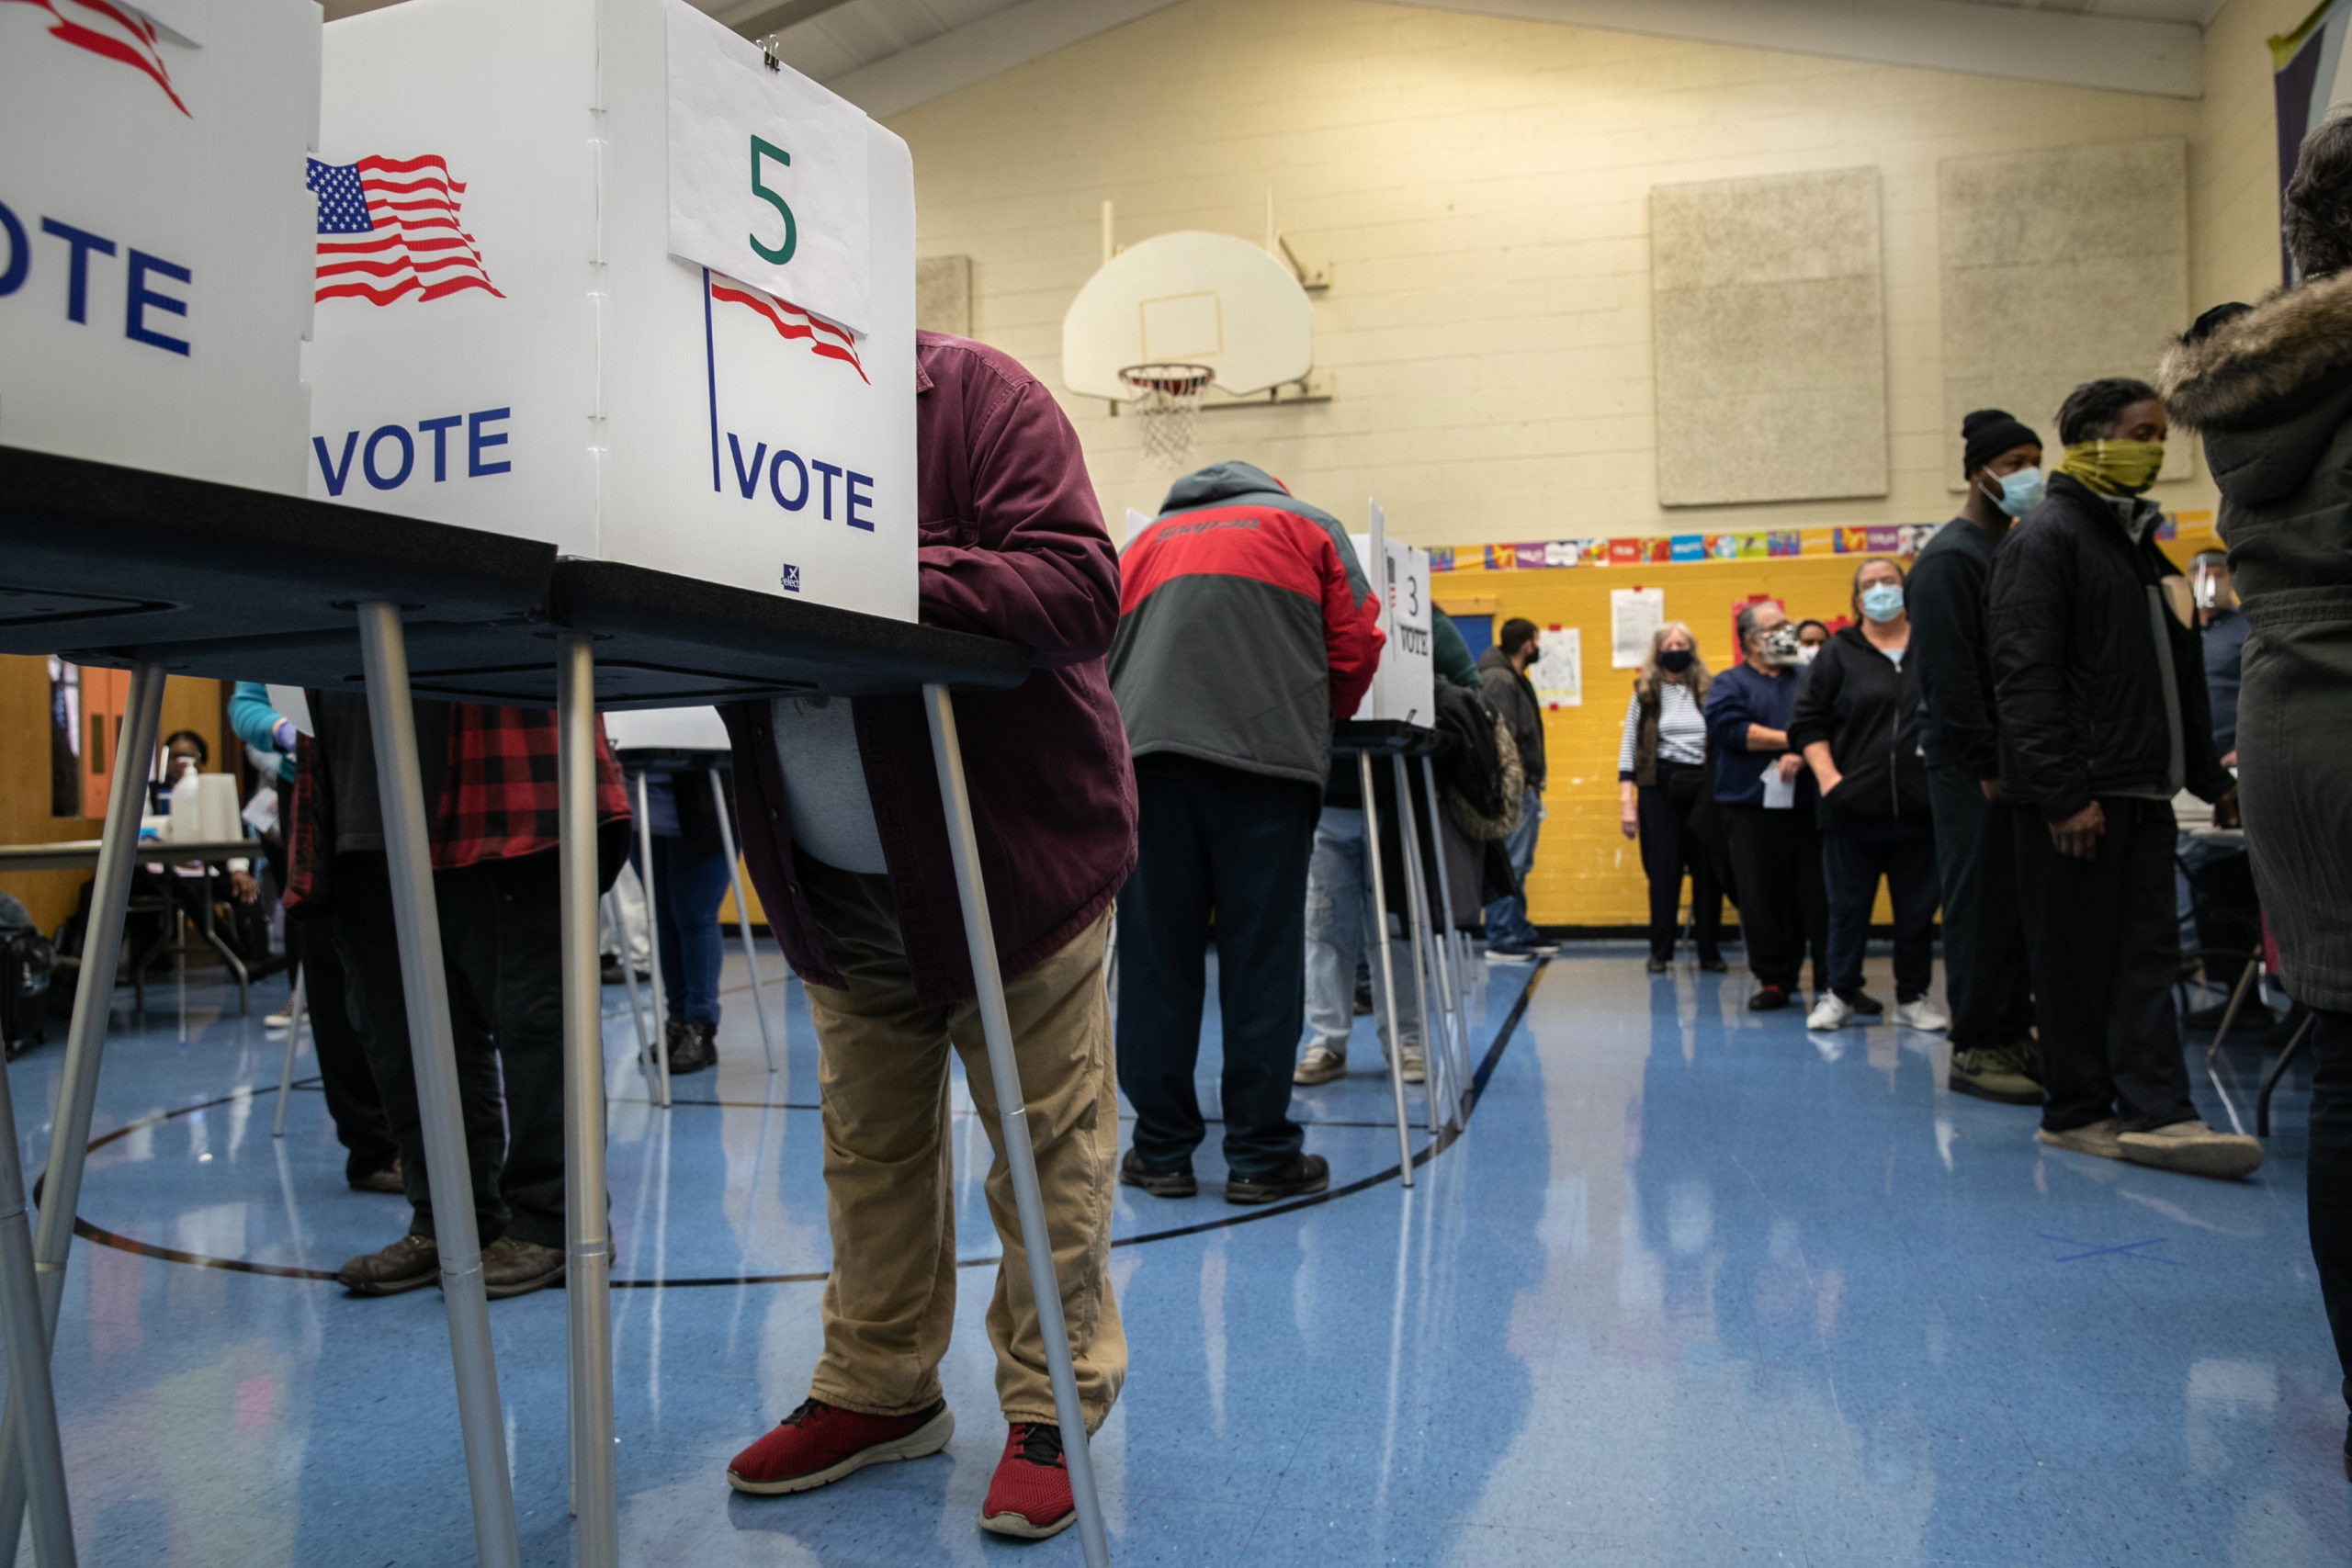 Voters fill out their ballots at a school gymnasium on November 03, 2020 in Lansing, Michigan. After a record-breaking early voting turnout, Americans went to the polls on the last day to cast their vote for incumbent U.S. President Donald Trump or Democratic nominee Joe Biden in the 2020 presidential election. (Photo by John Moore/Getty Images)